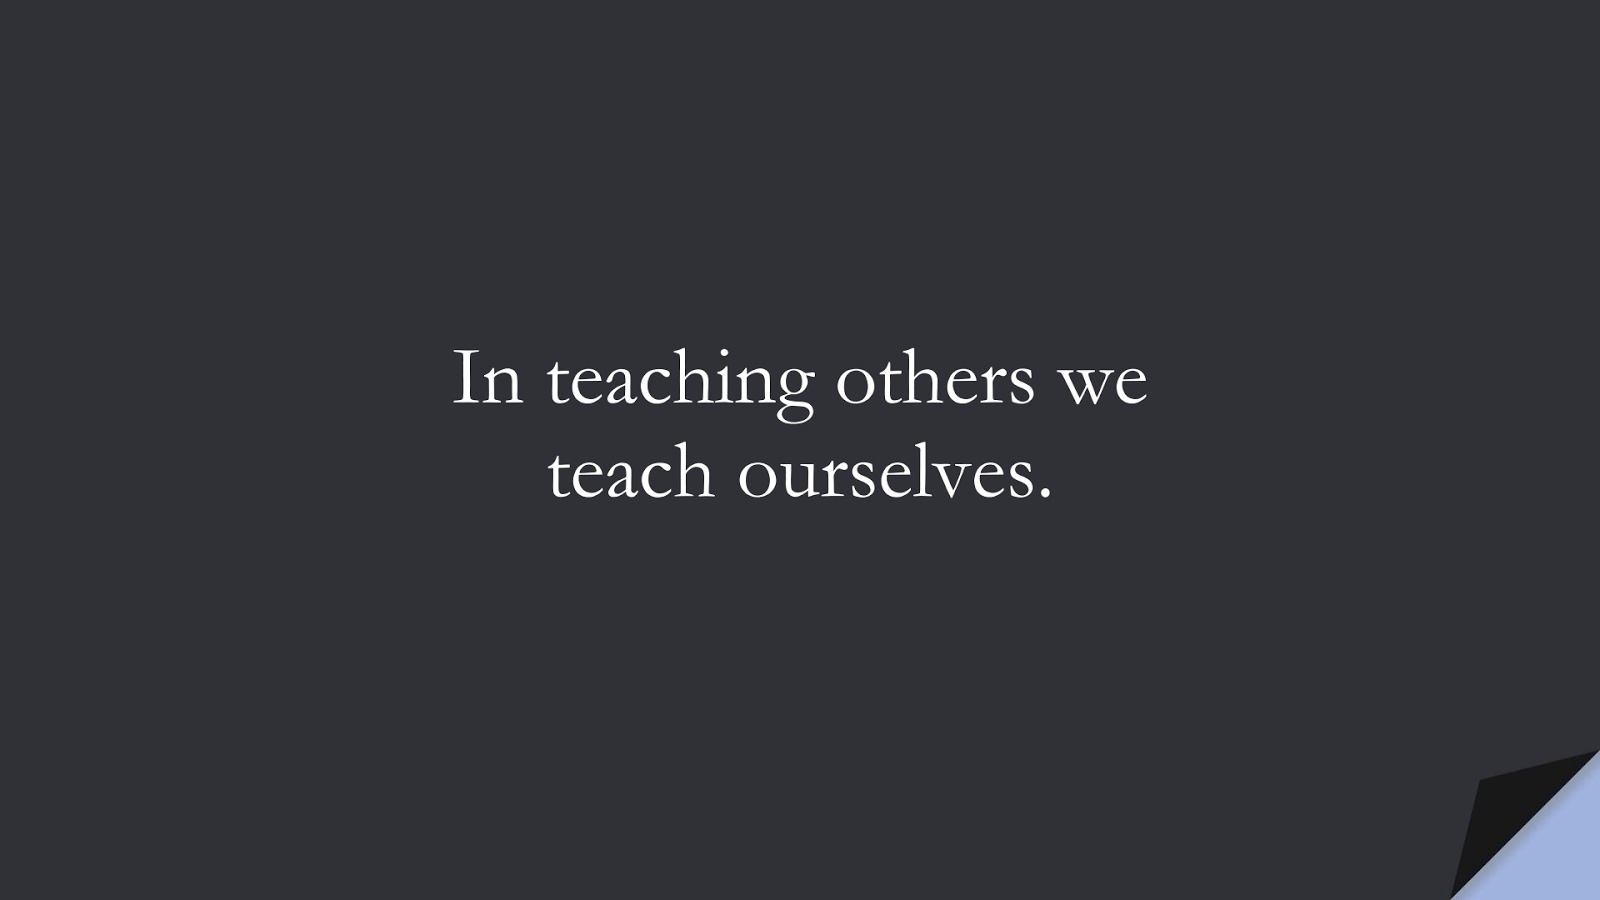 In teaching others we teach ourselves.FALSE